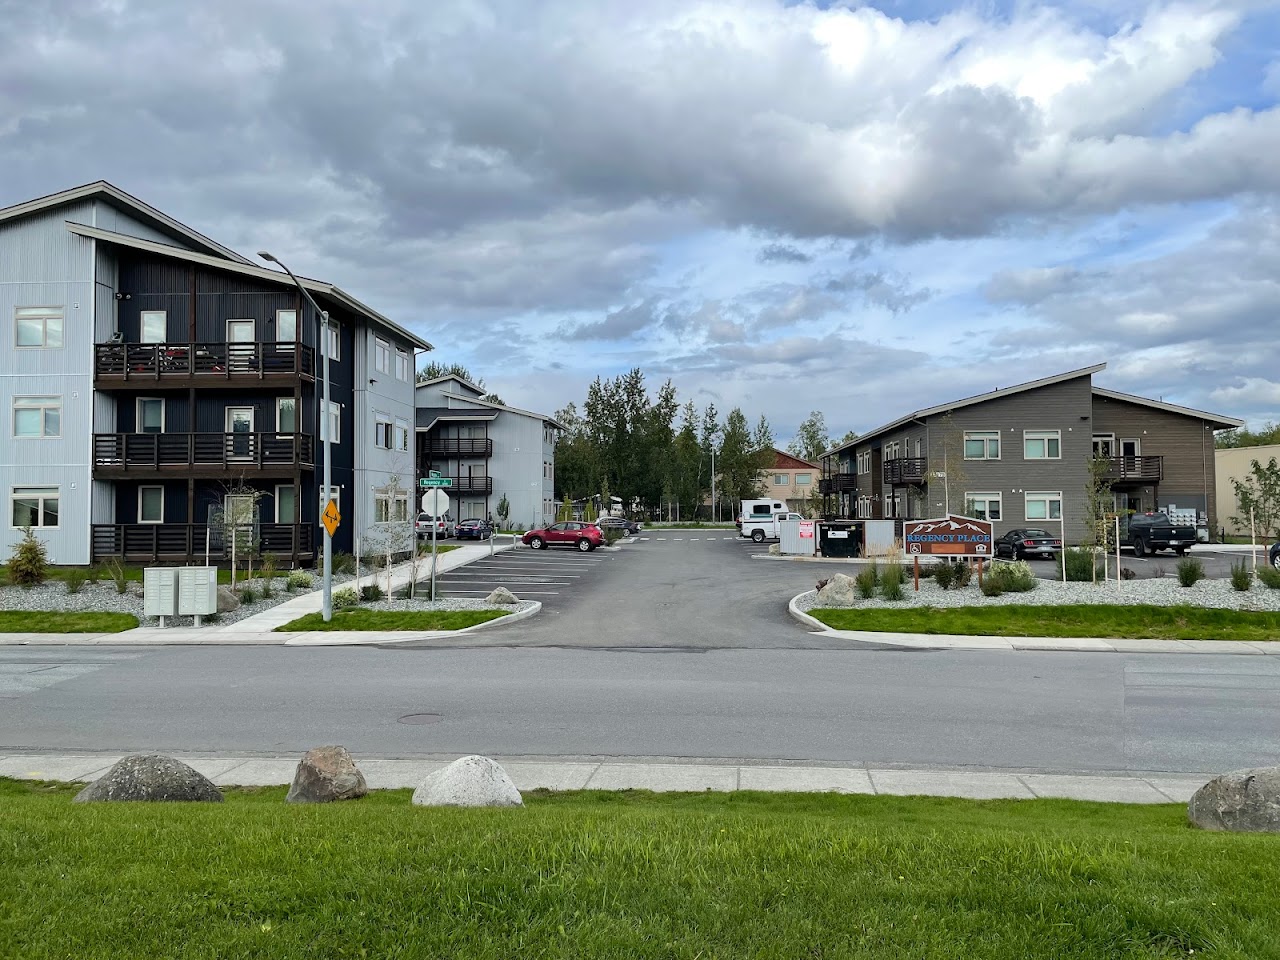 Photo of REGENCY PLACE, LLC. Affordable housing located at 12175 MAZAMA PLACE EAGLE RIVER, AK 99577